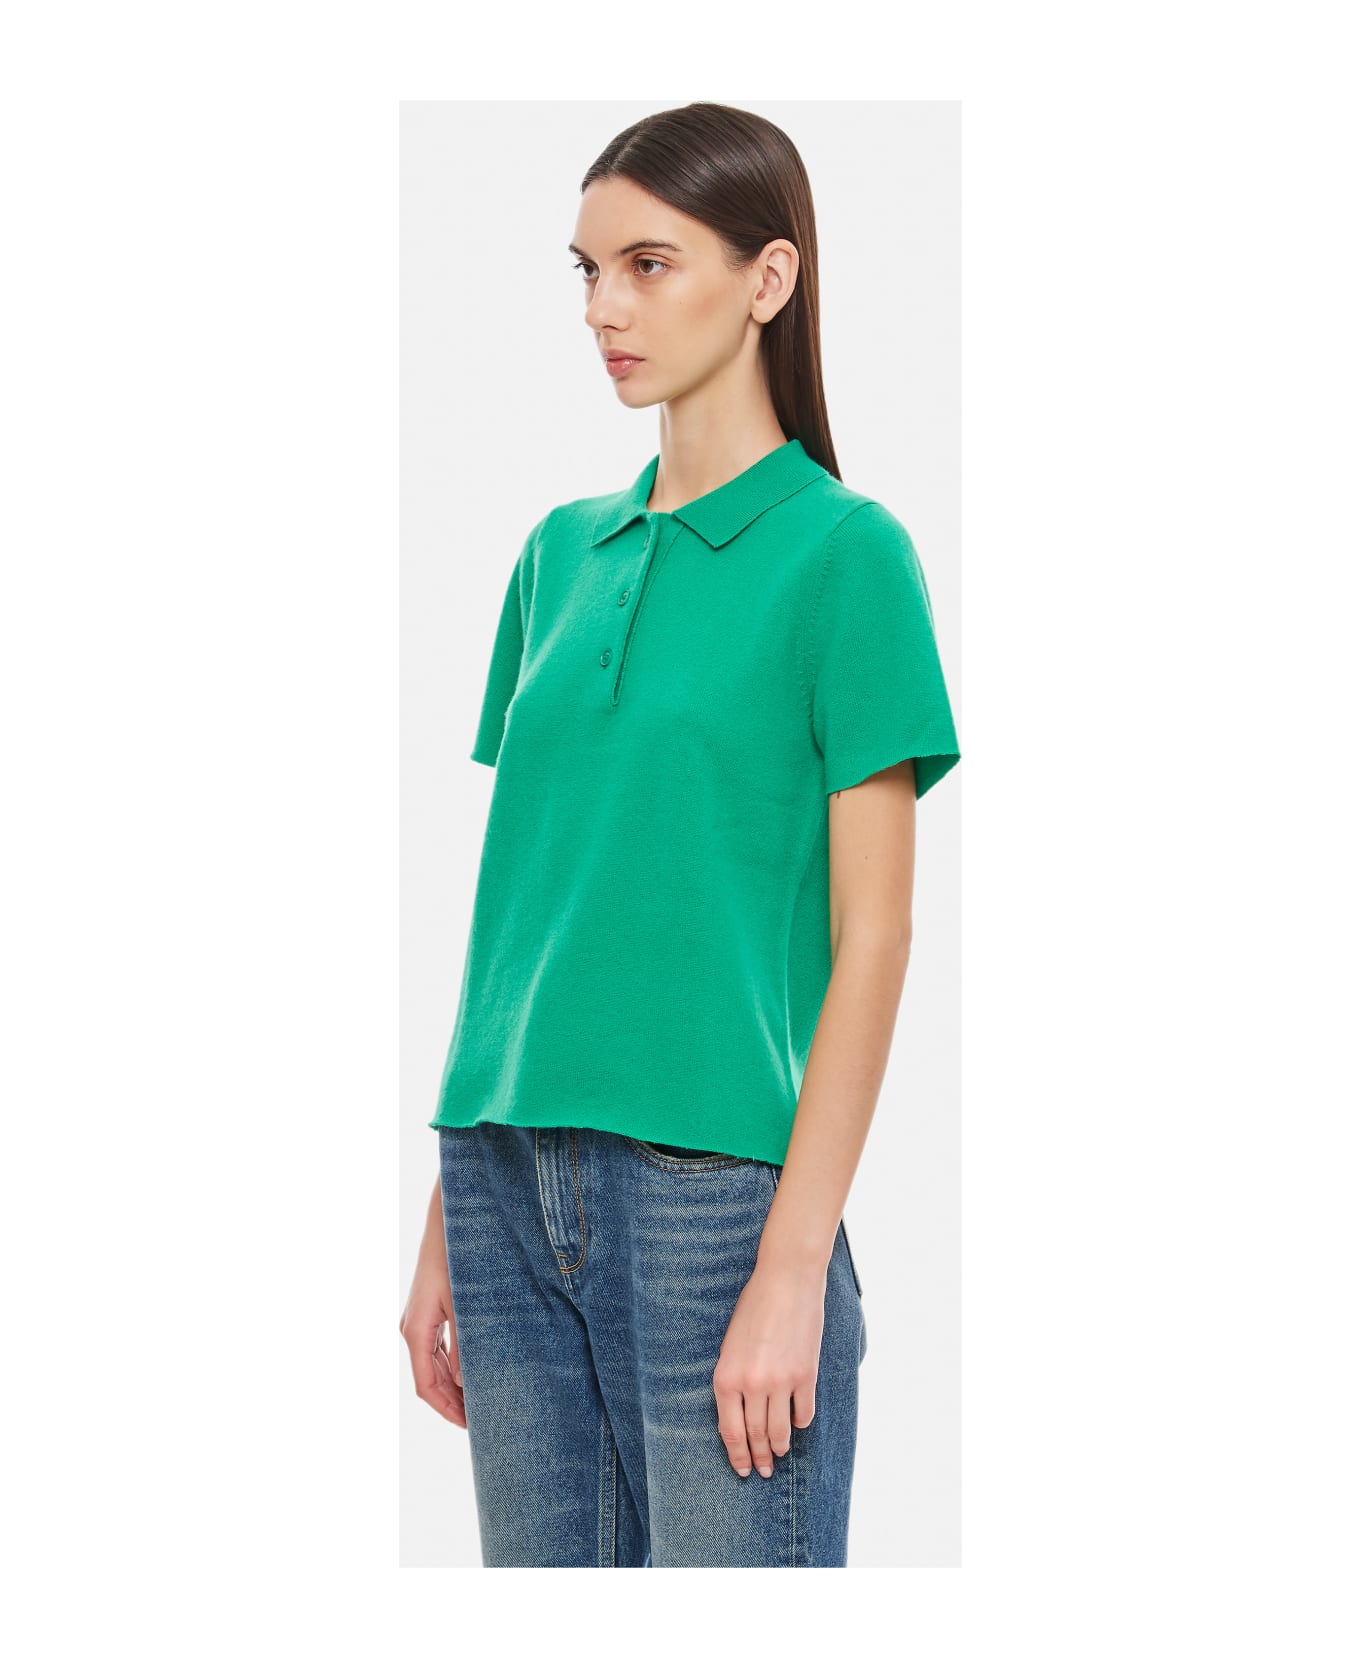 Extreme Cashmere Polo "salamander" - Green